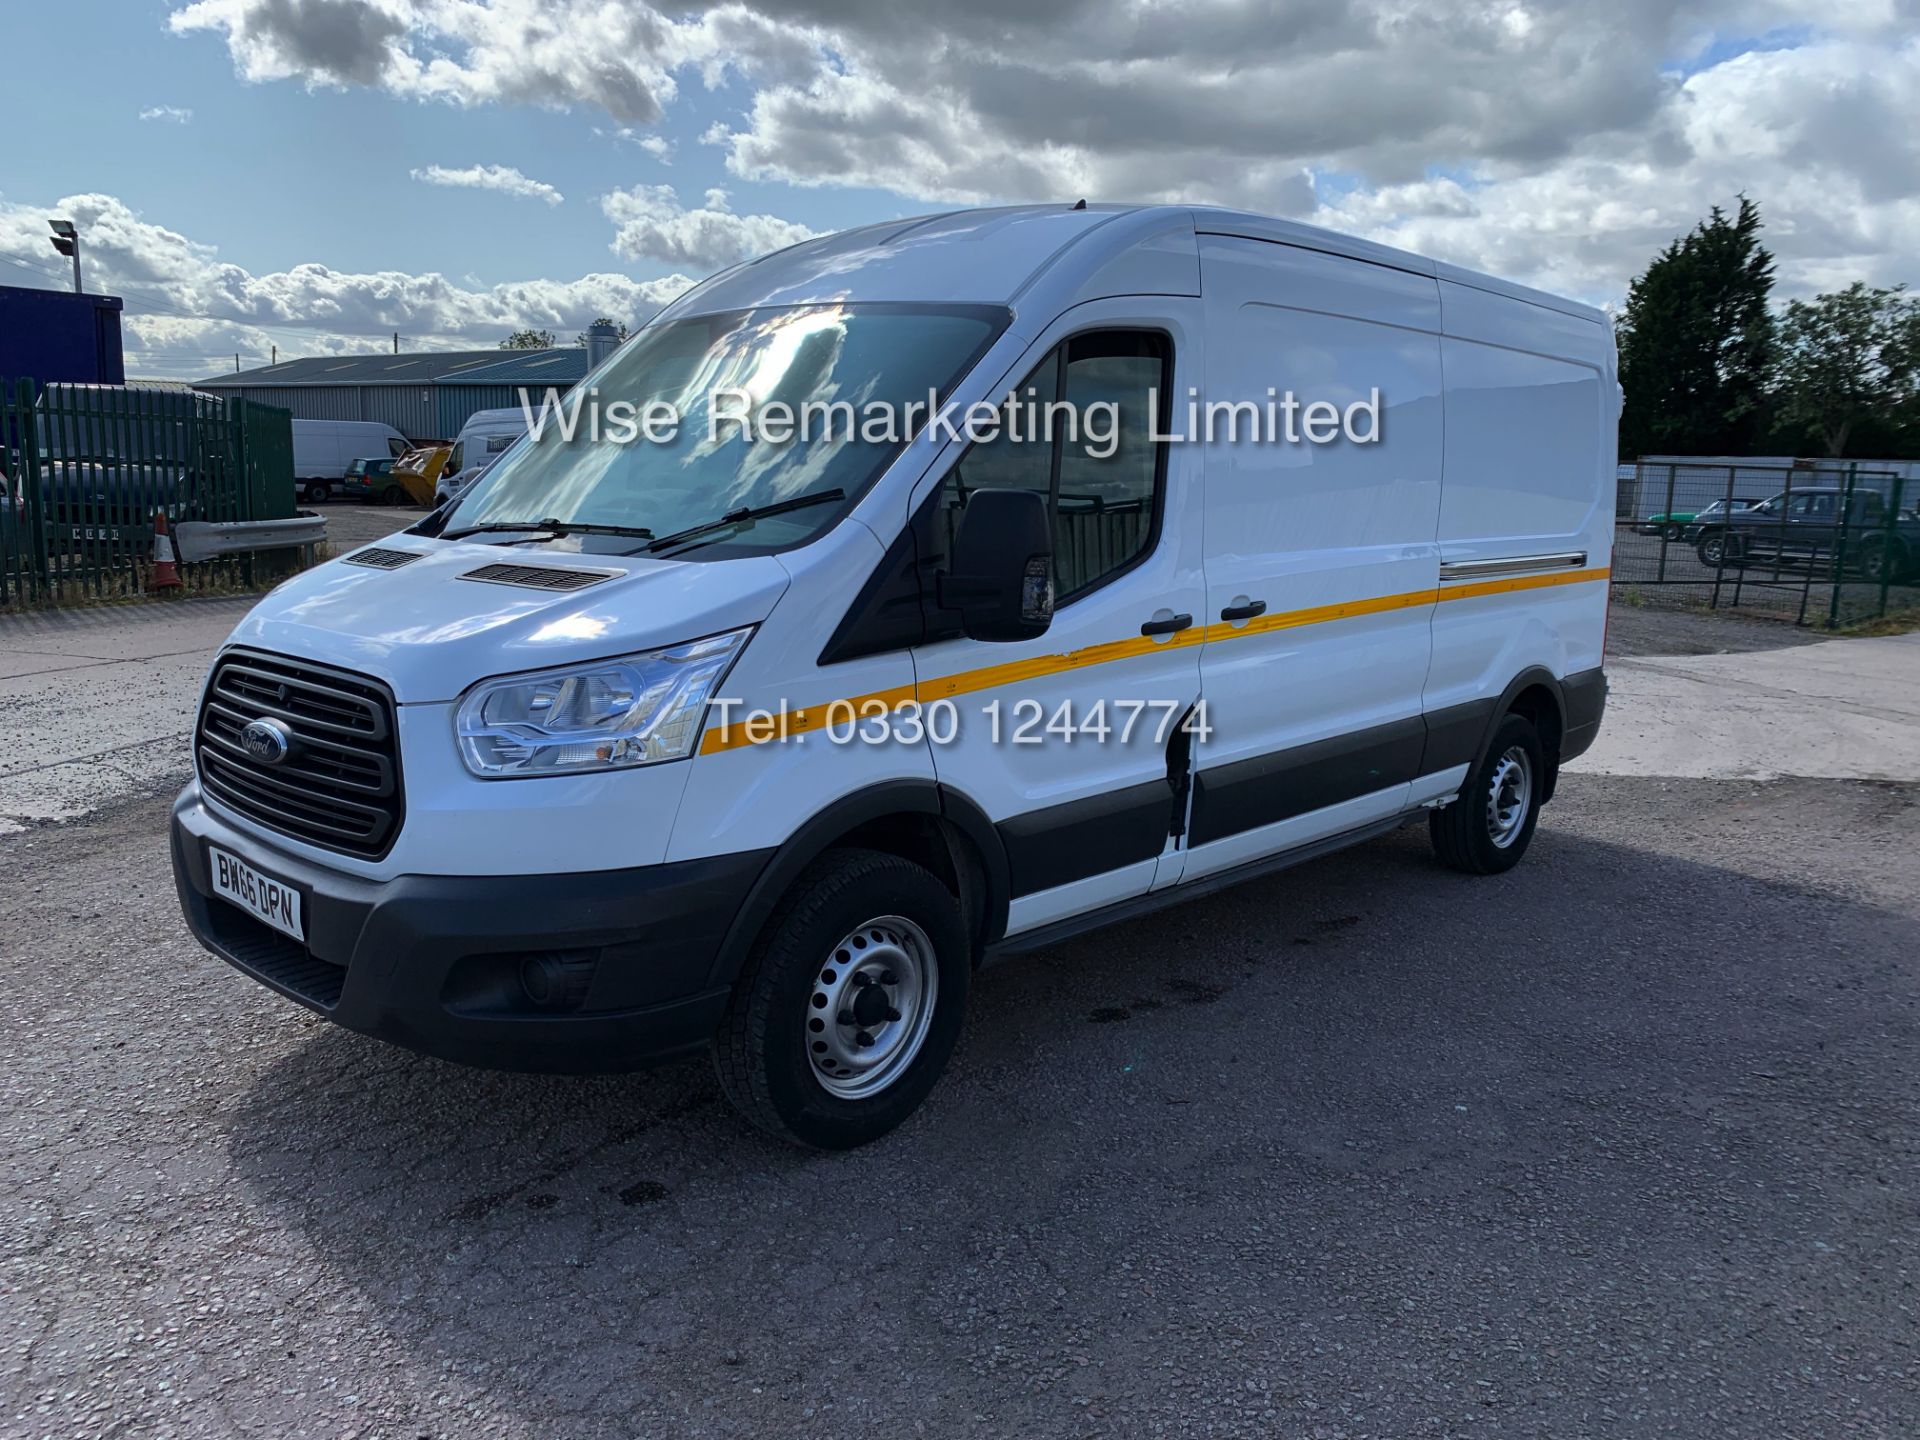 FORD TRANSIT 350 L3 2.2 TDCi 125PS (2017 MODEL) 1 KEEPER FROM NEW